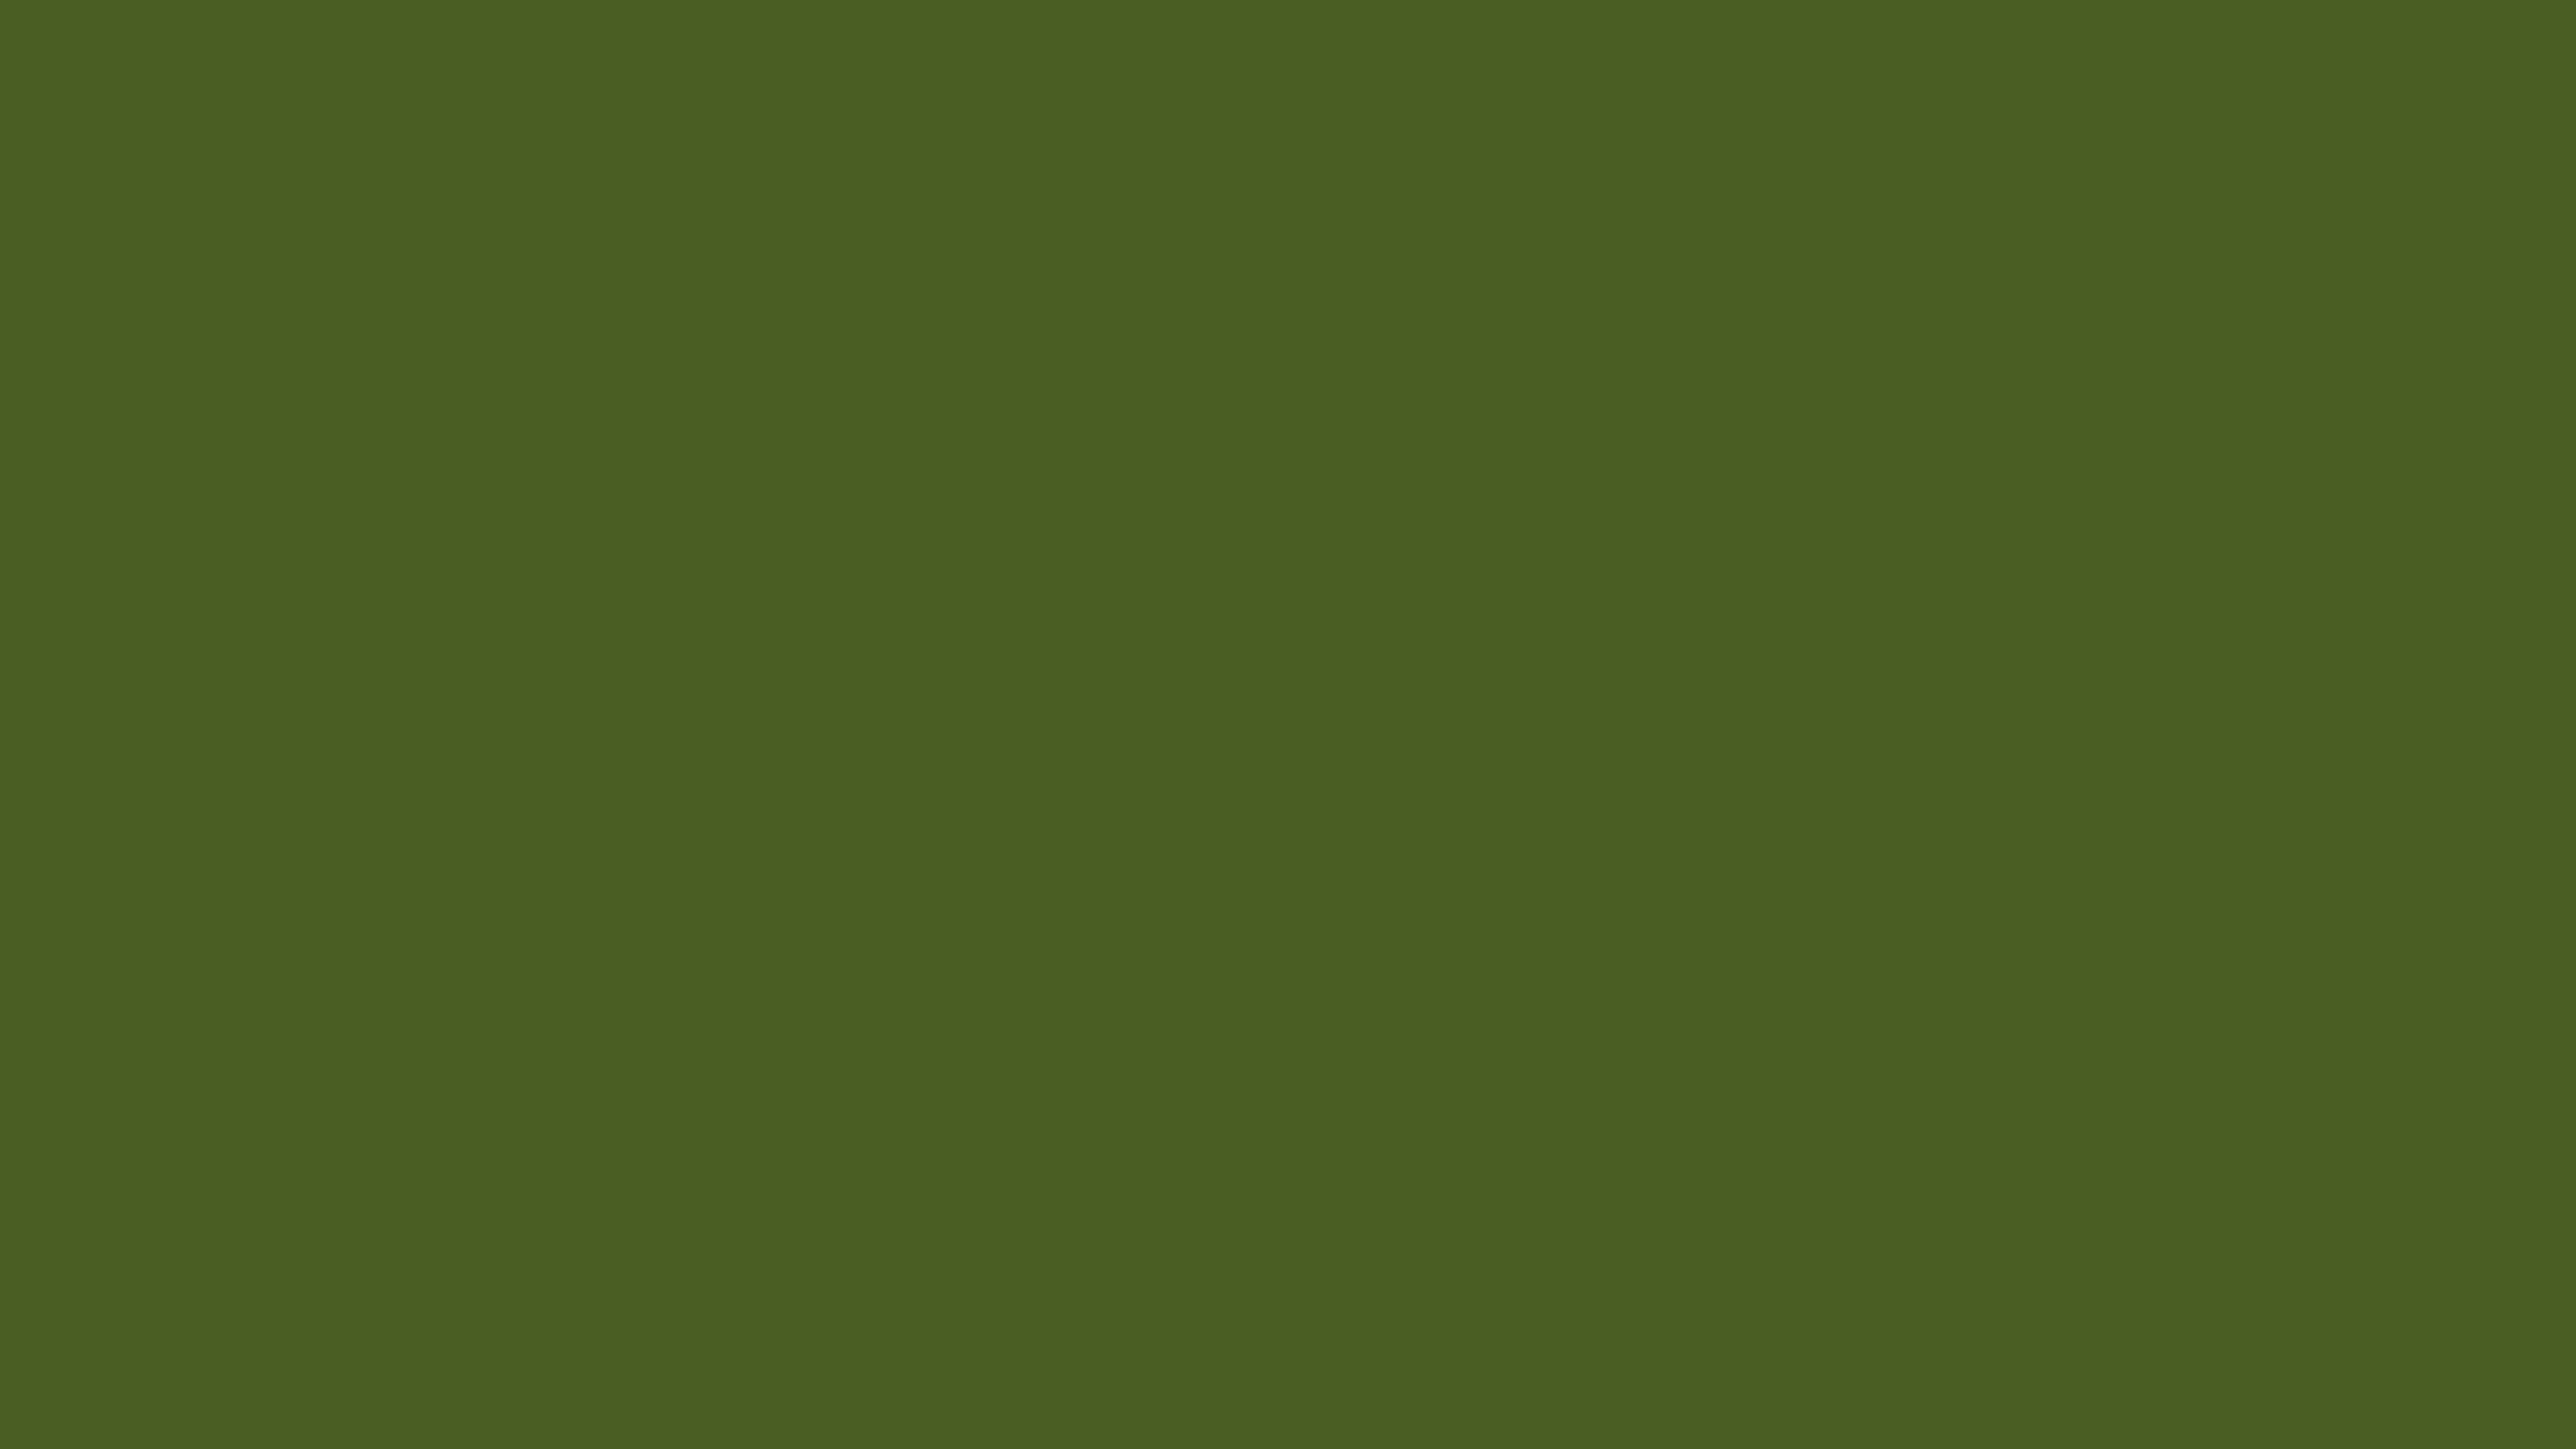 4096x2304 Dark Moss Green Solid Color Background